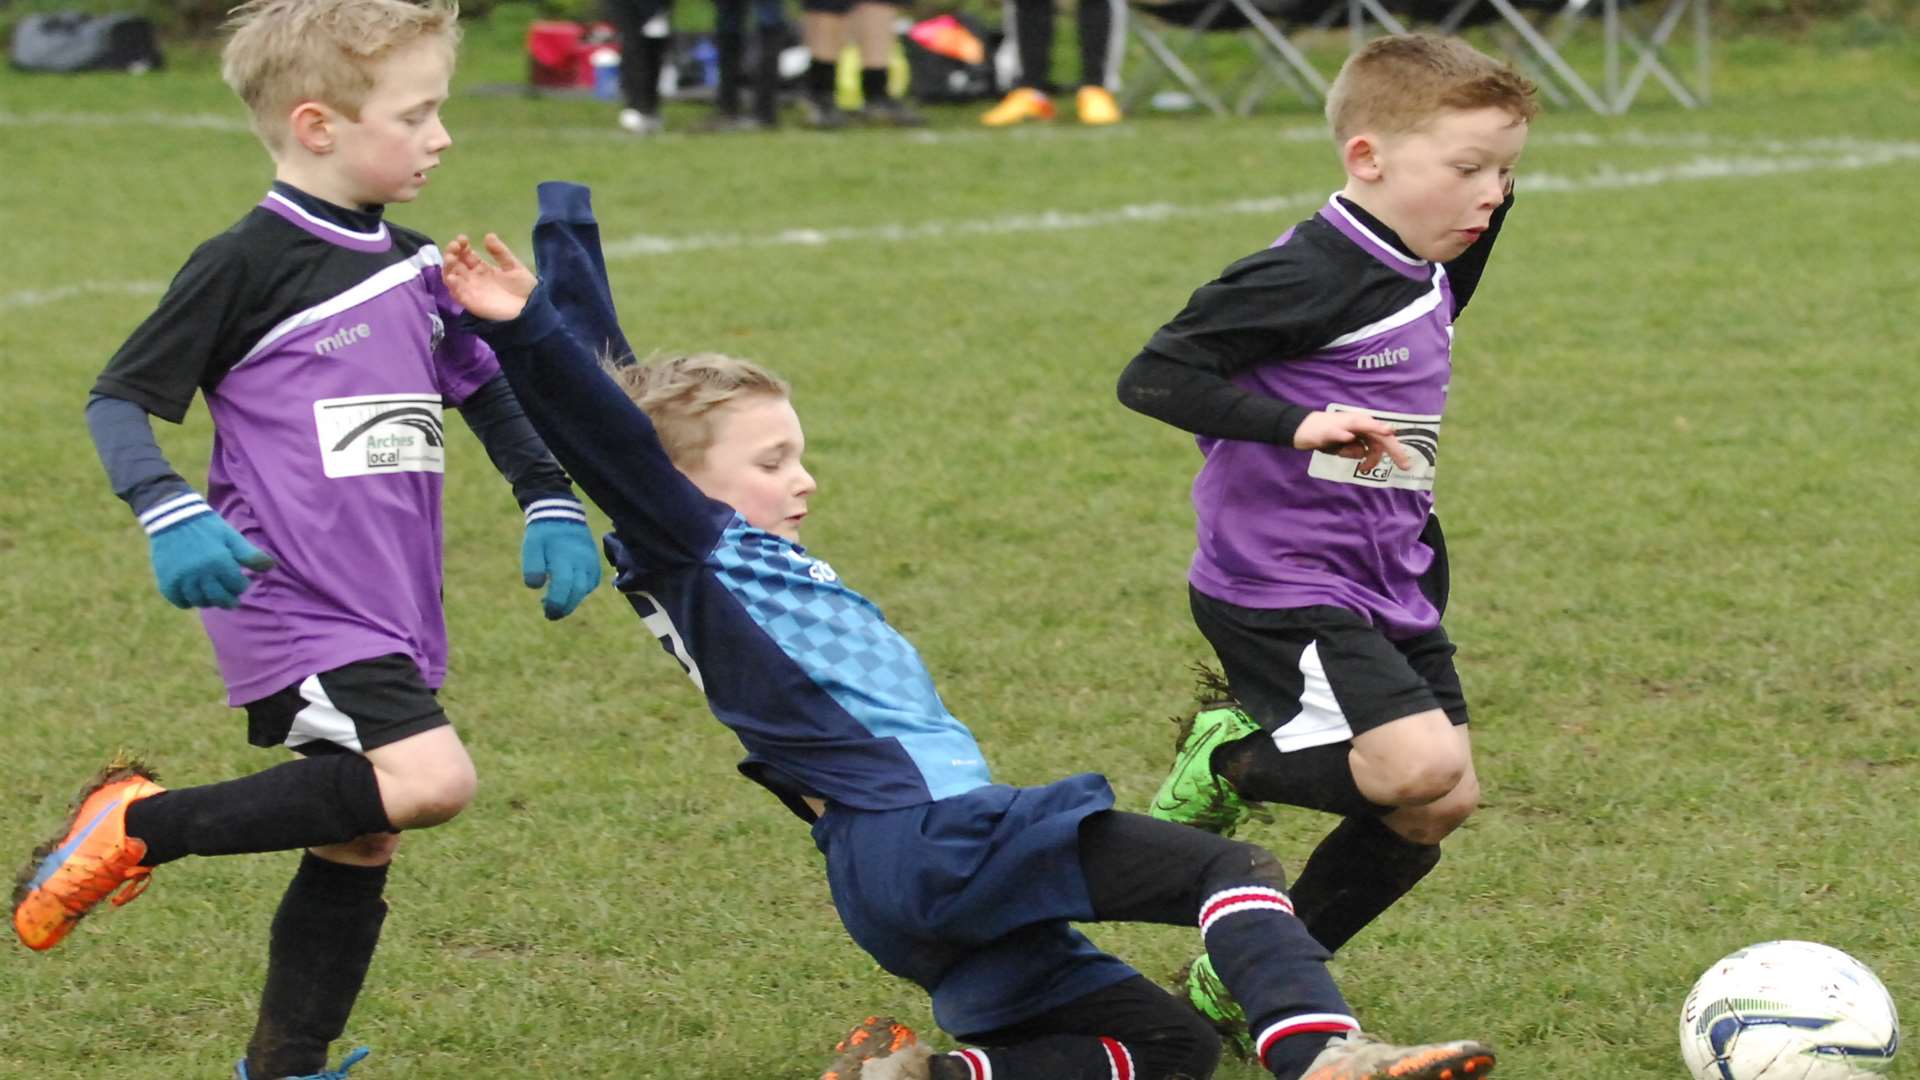 Hempstead Valley under-7s on the stretch as Anchorians head for goal Picture: Chris Davey